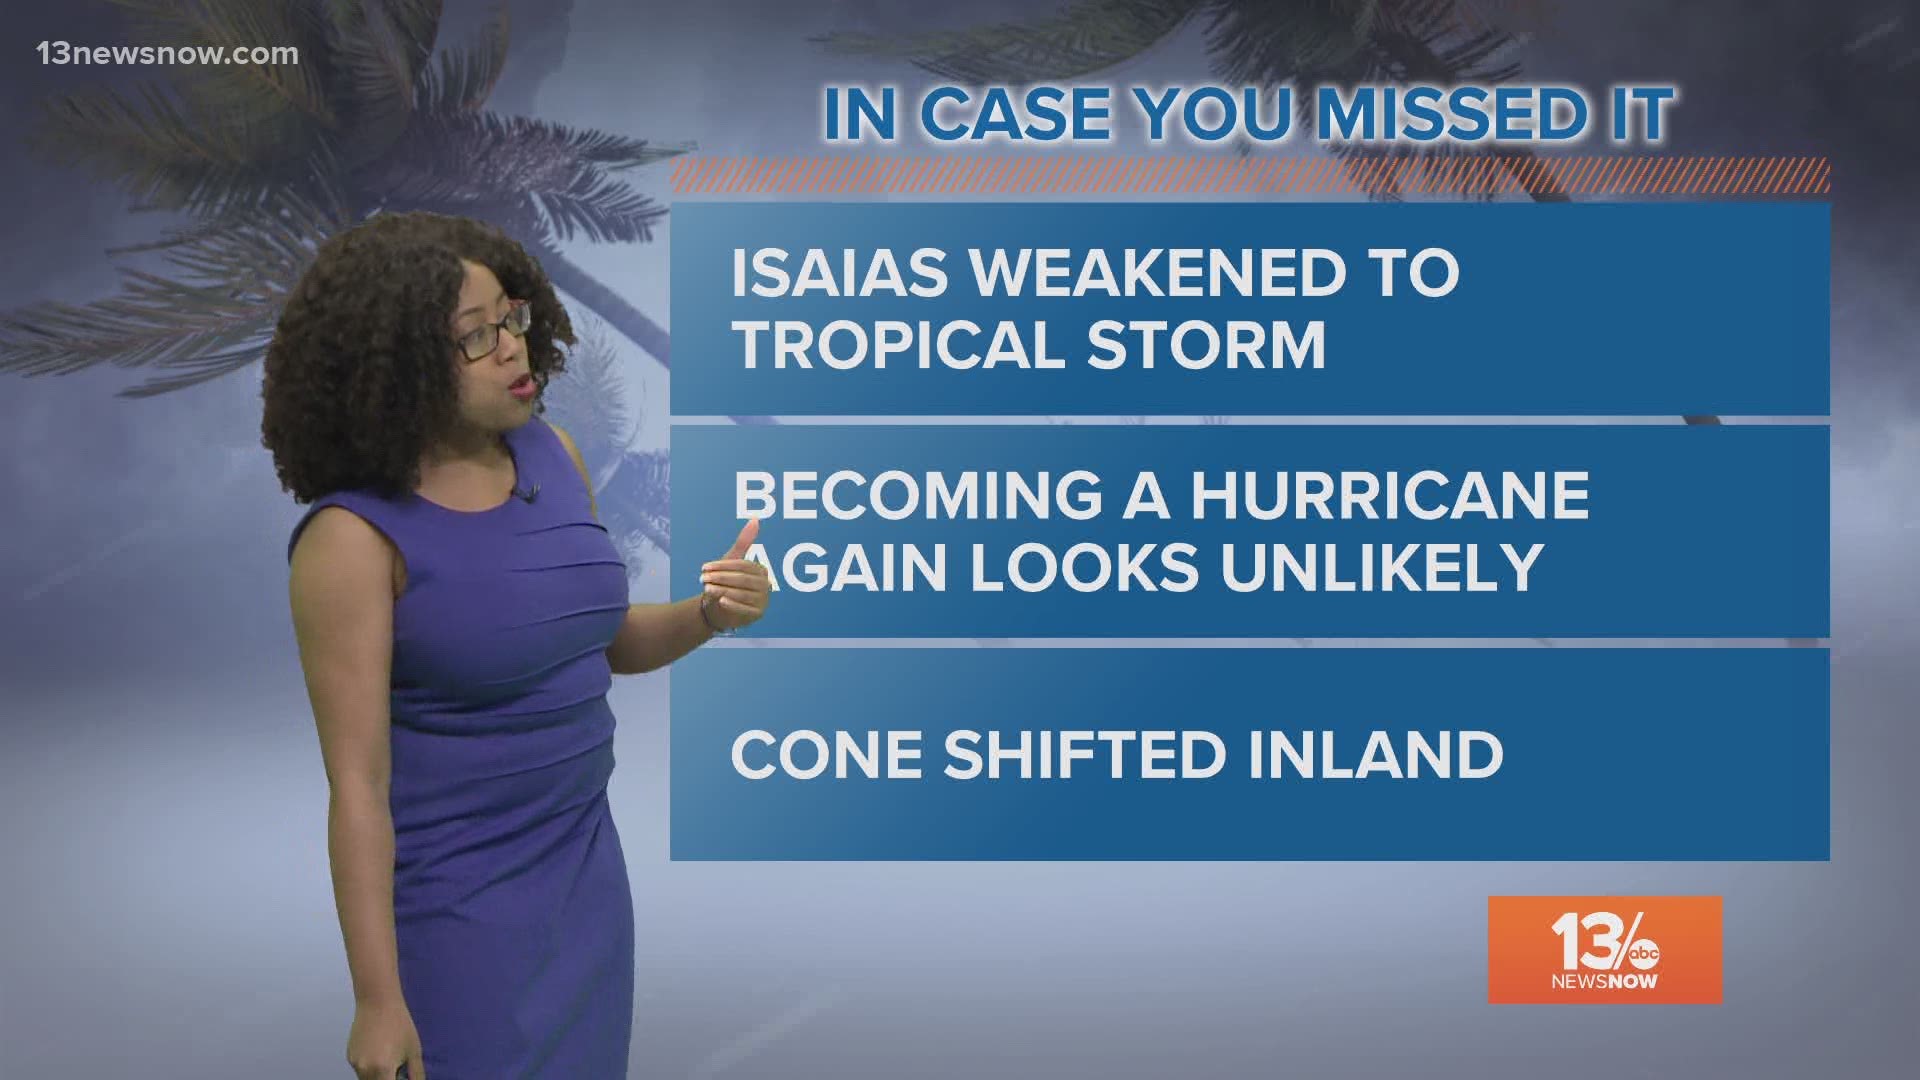 Tropical Storm Isaias is now unlikely to become a hurricane again. The cone of uncertainty has now shifted inland meaning weaker storms are possible for our area.